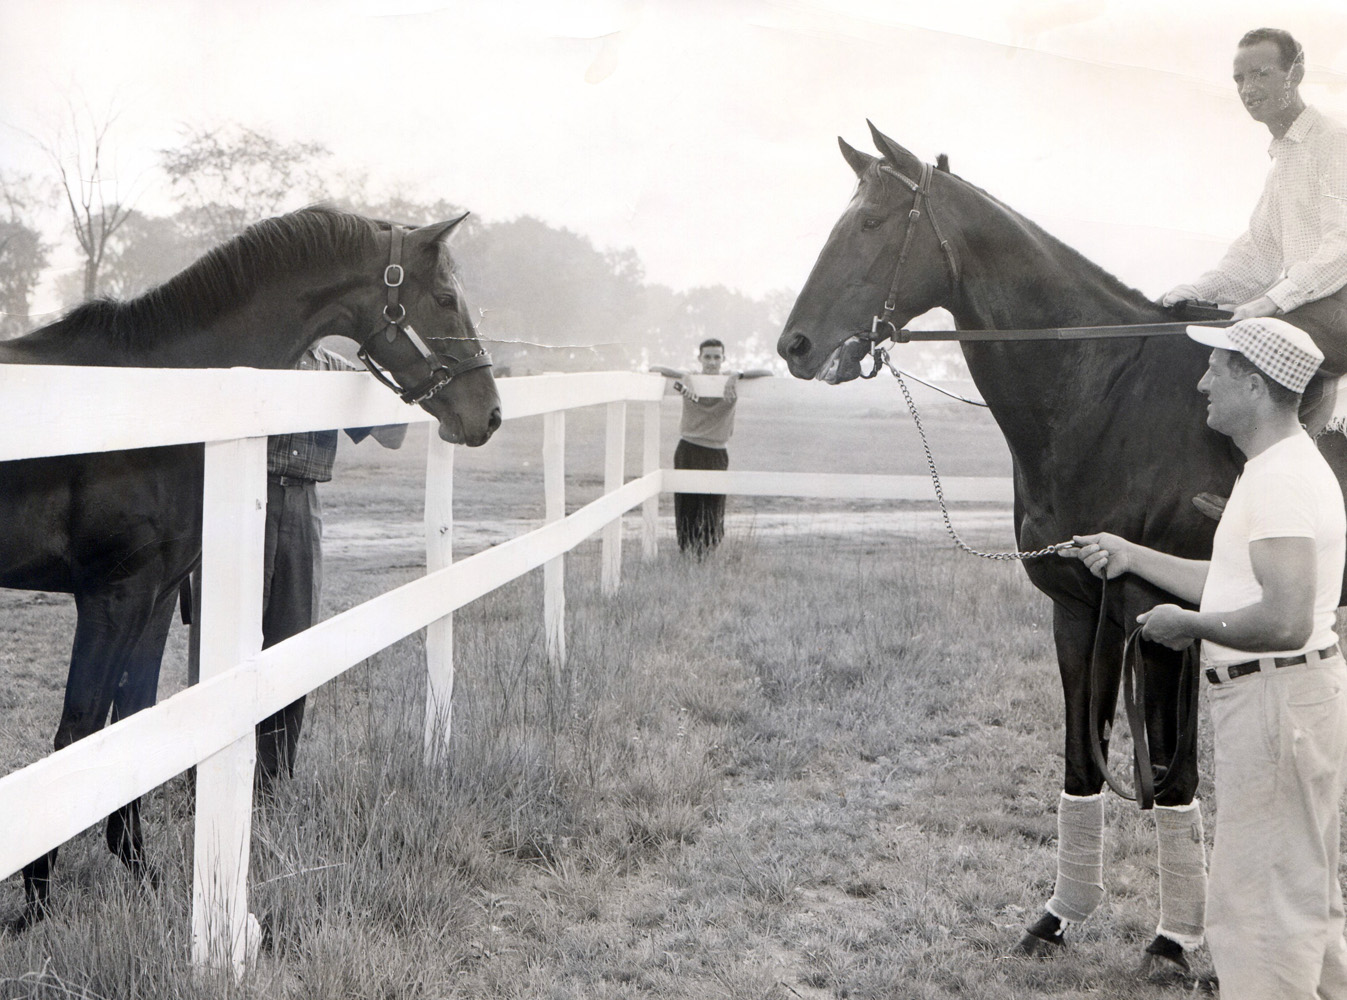 Gallant Man, left, visiting with fellow future Hall of Famer Bold Ruler, right, 1958 (Museum Collection)